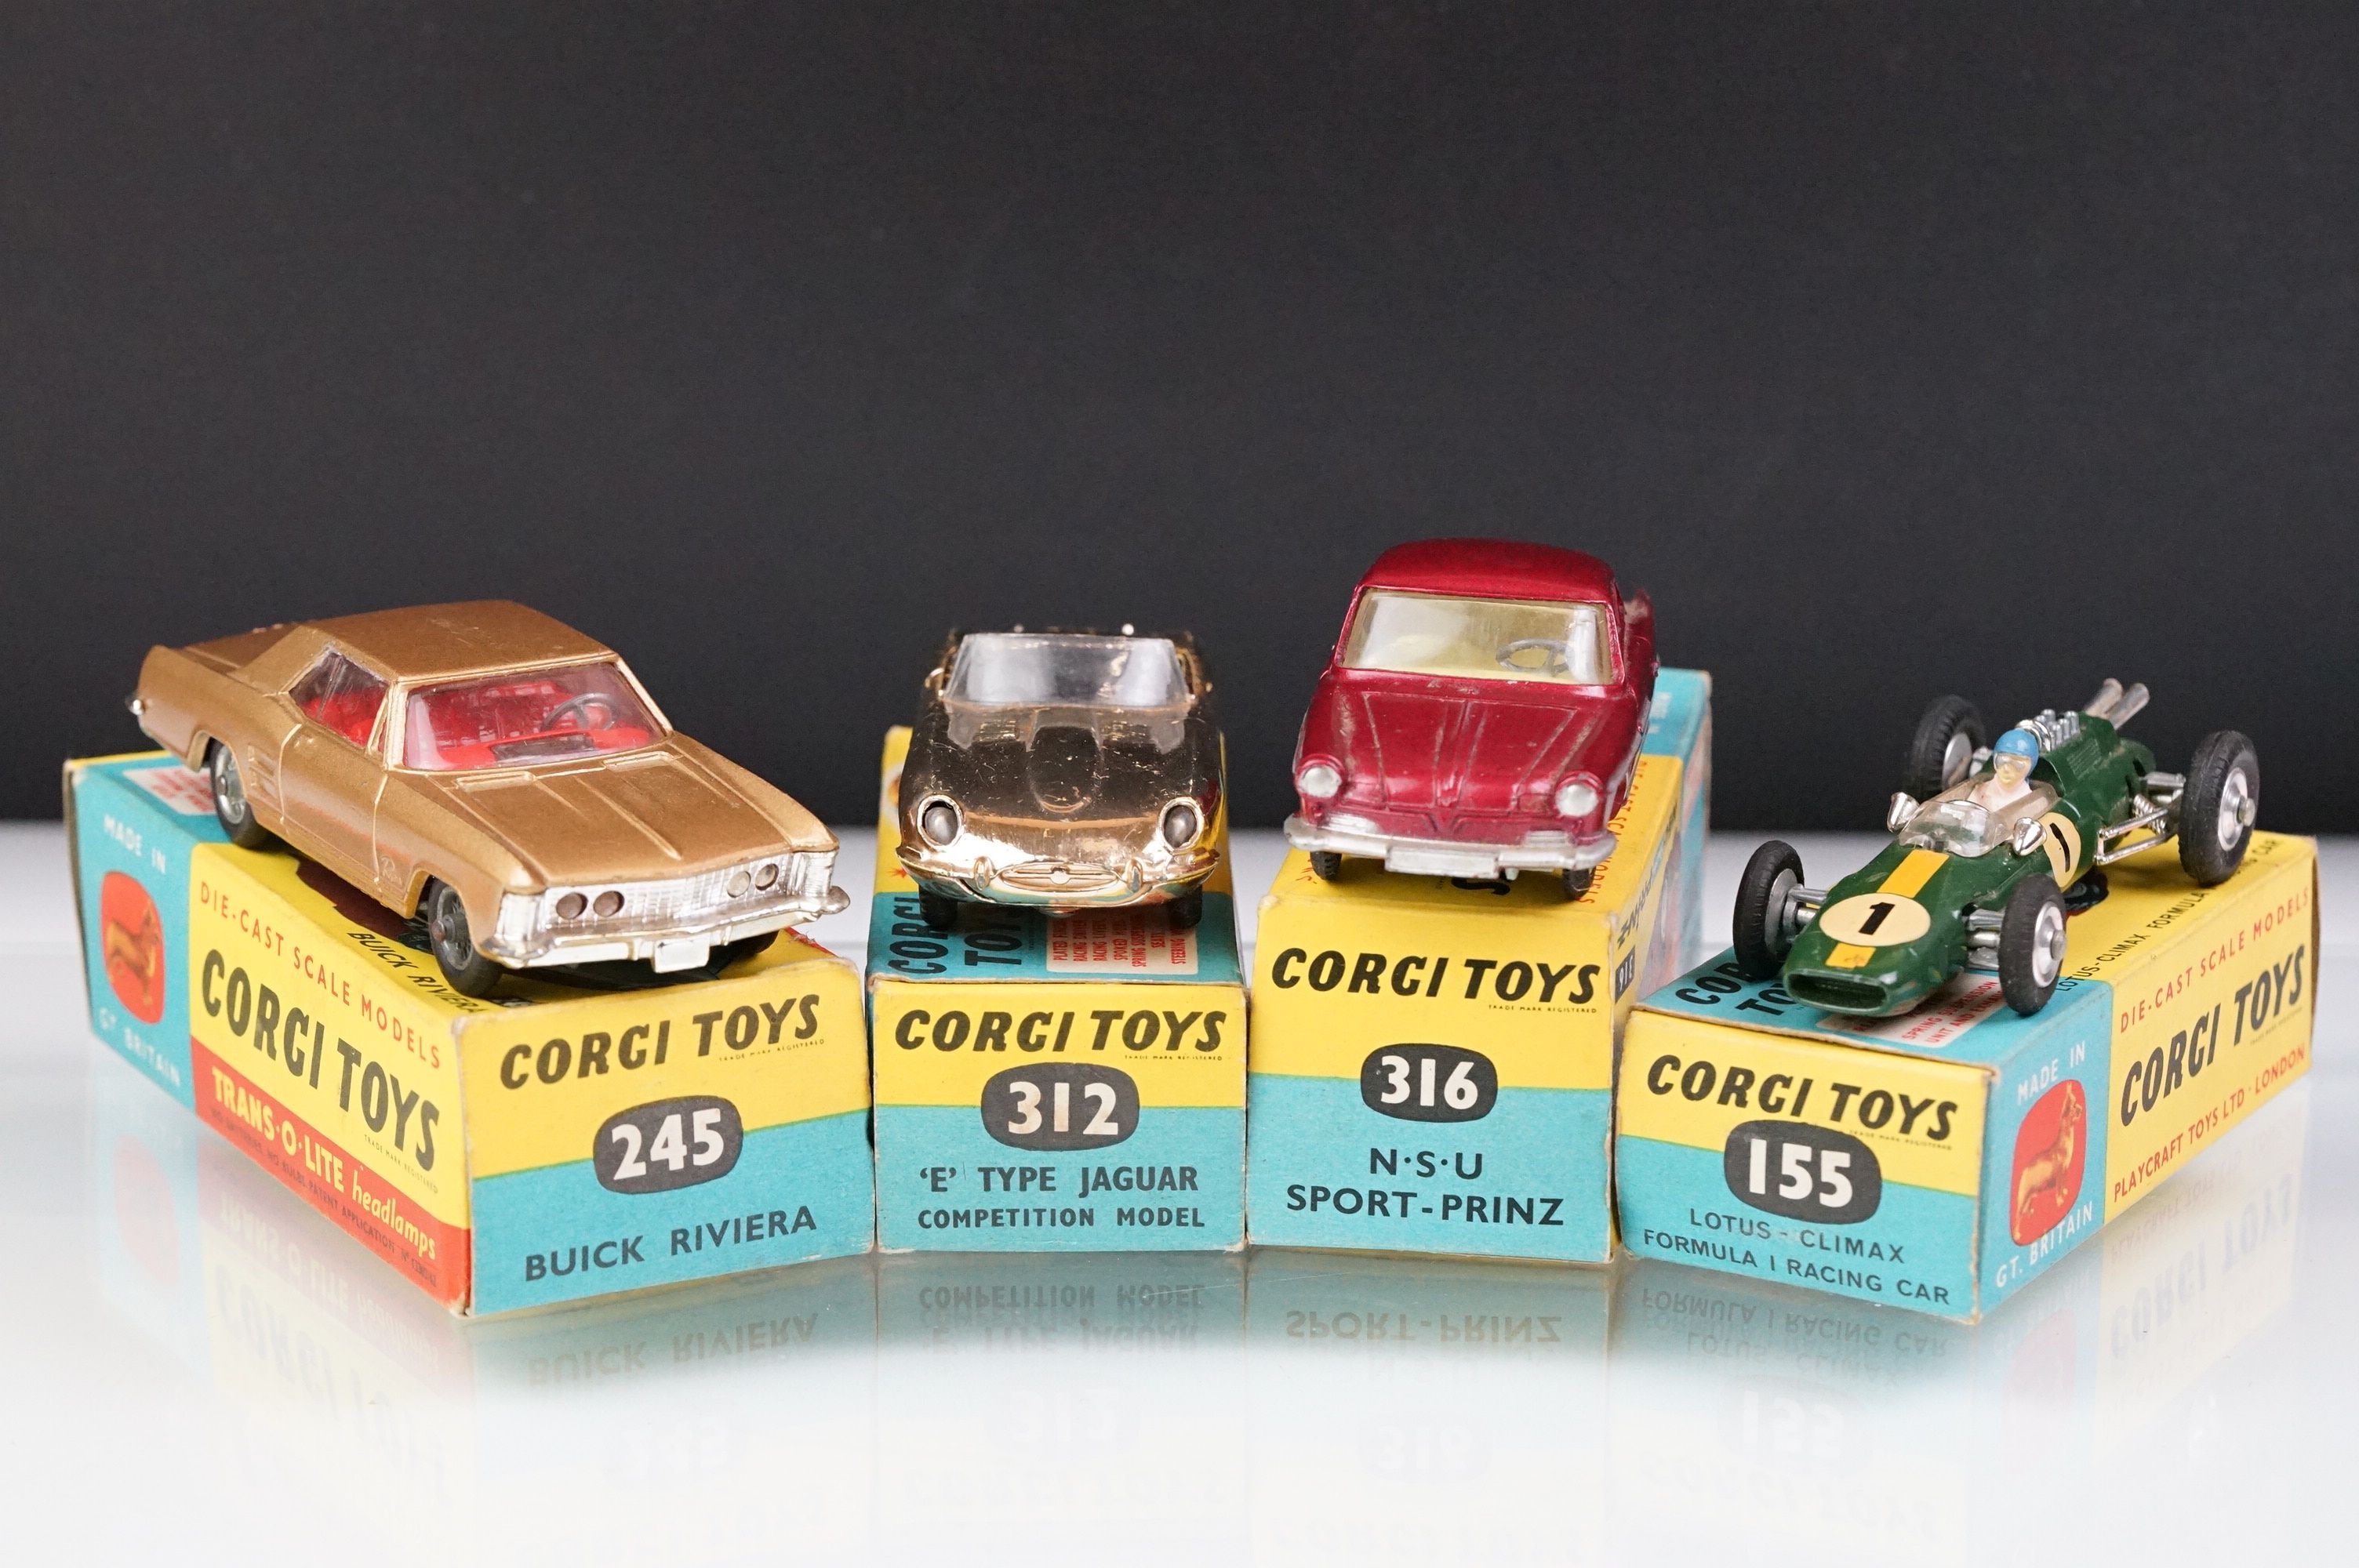 Four boxed Corgi diecast models to include 155 Lotus Climax Formula I Racing Car in green, 245 Buick